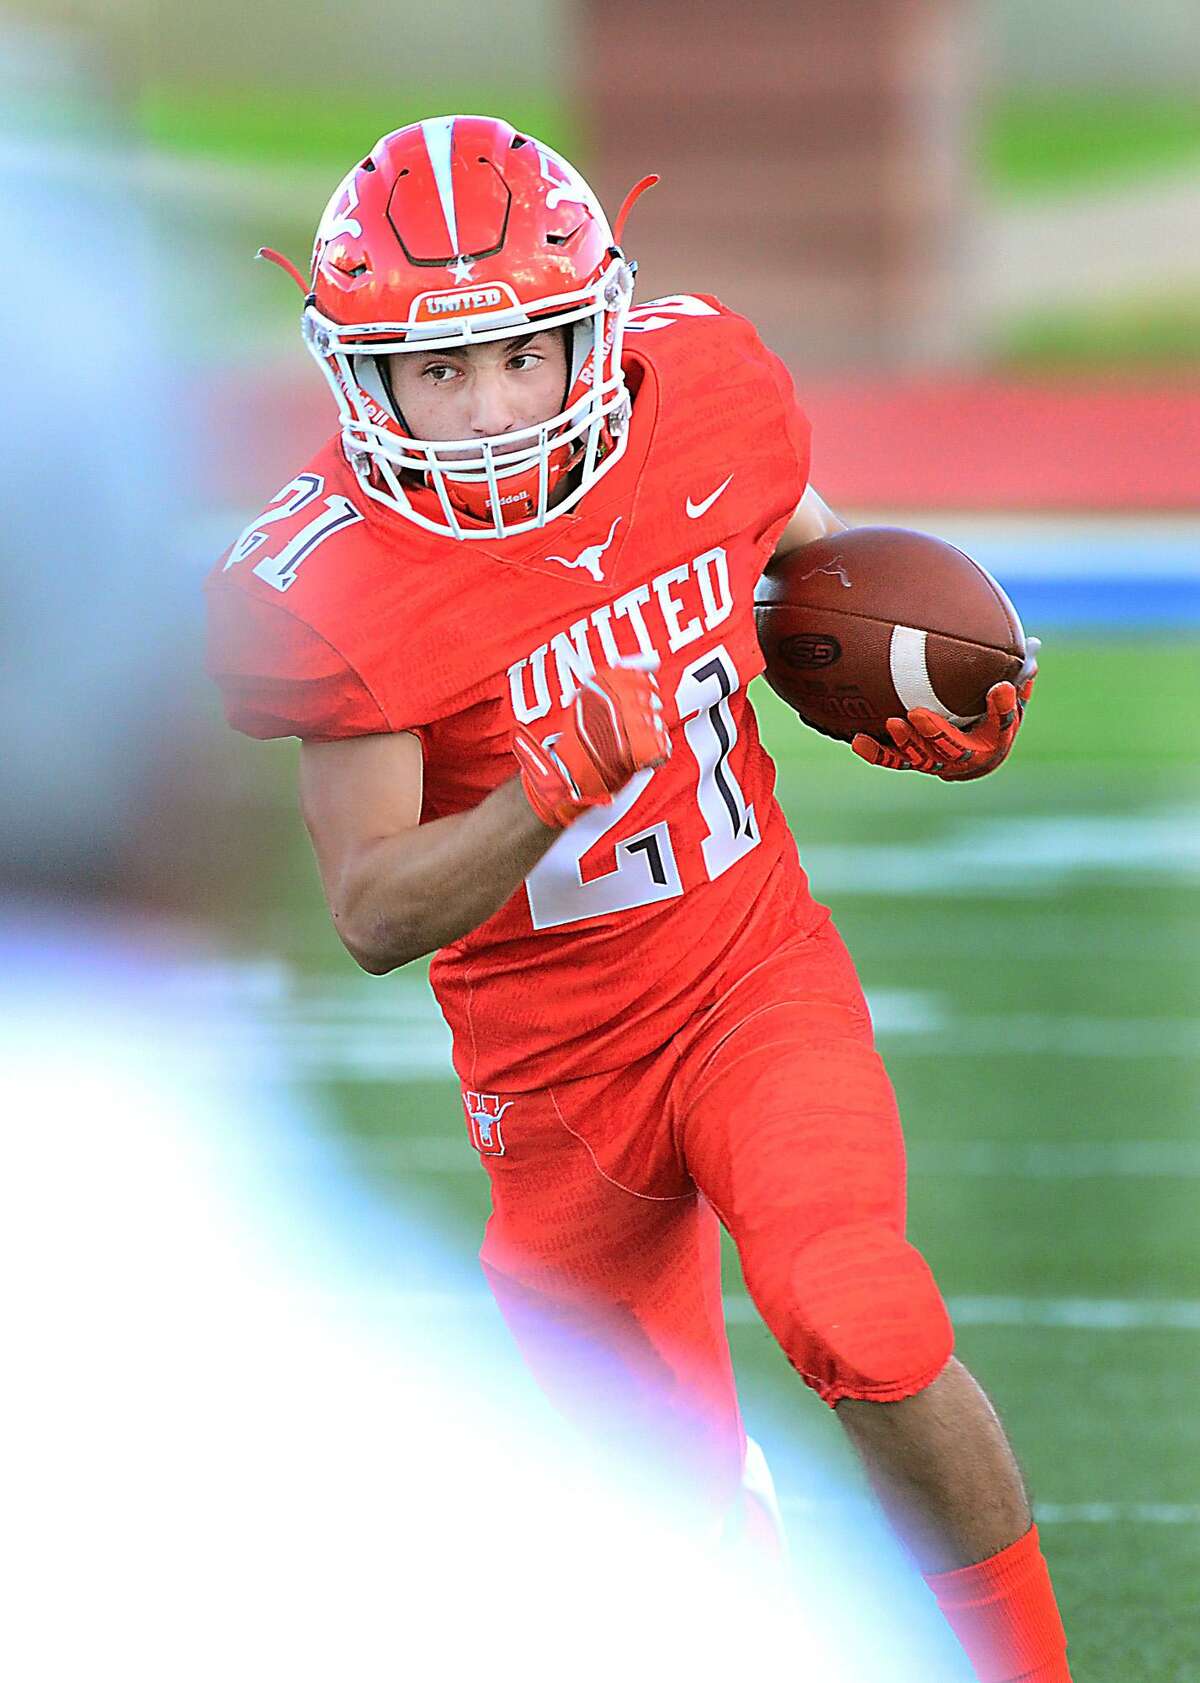 United receiver Michael Almeida had seven catches for 113 yards Thursday as the Longhorns had 596 total yards in a 50-49 loss to No. 16 San Marcos.